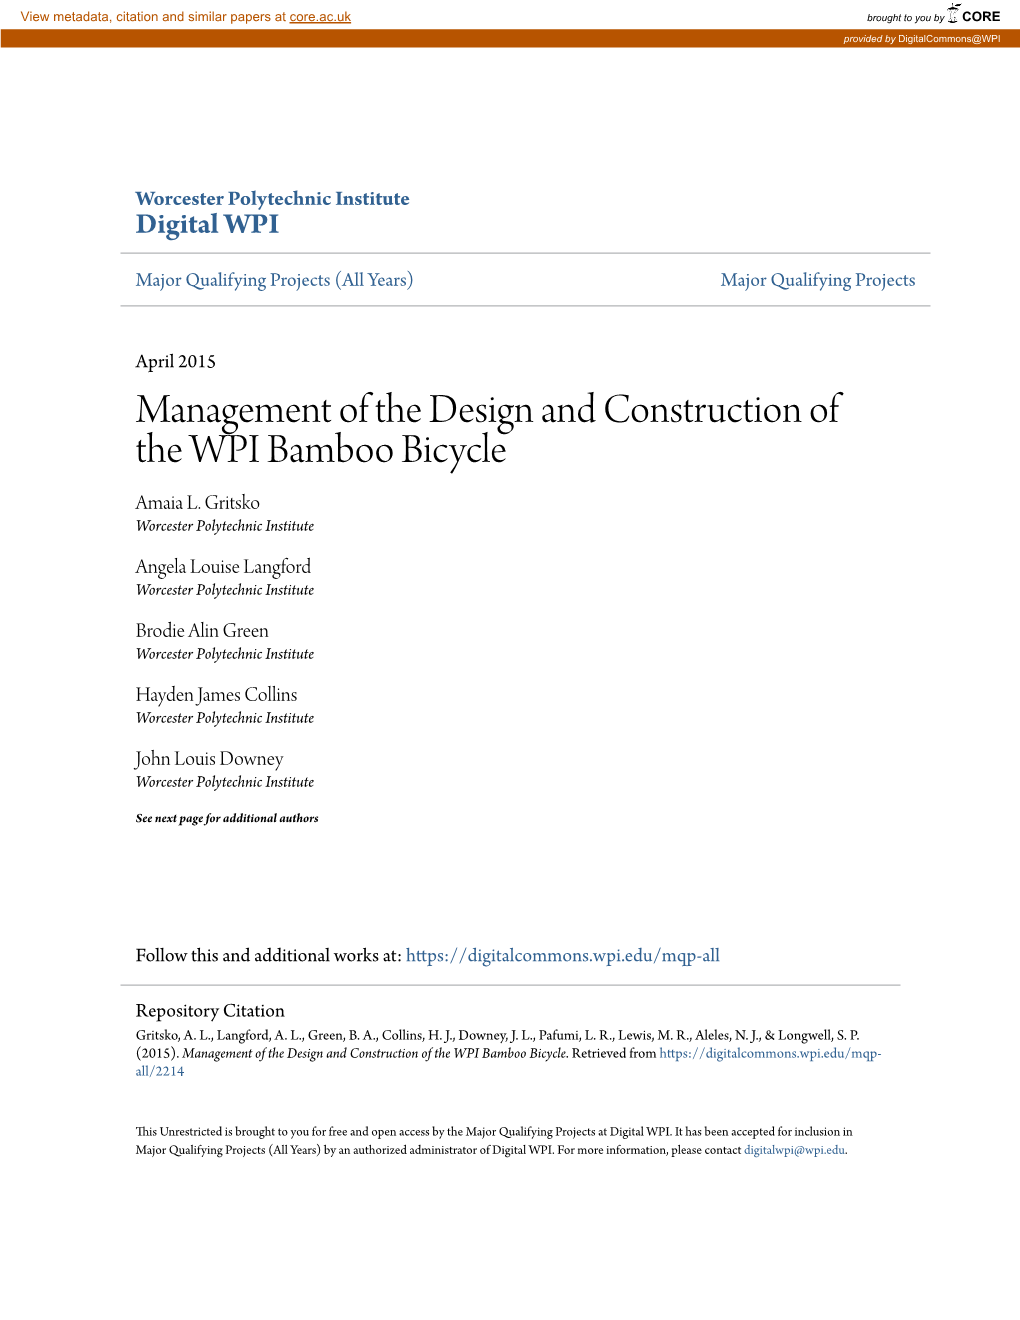 Management of the Design and Construction of the WPI Bamboo Bicycle Amaia L